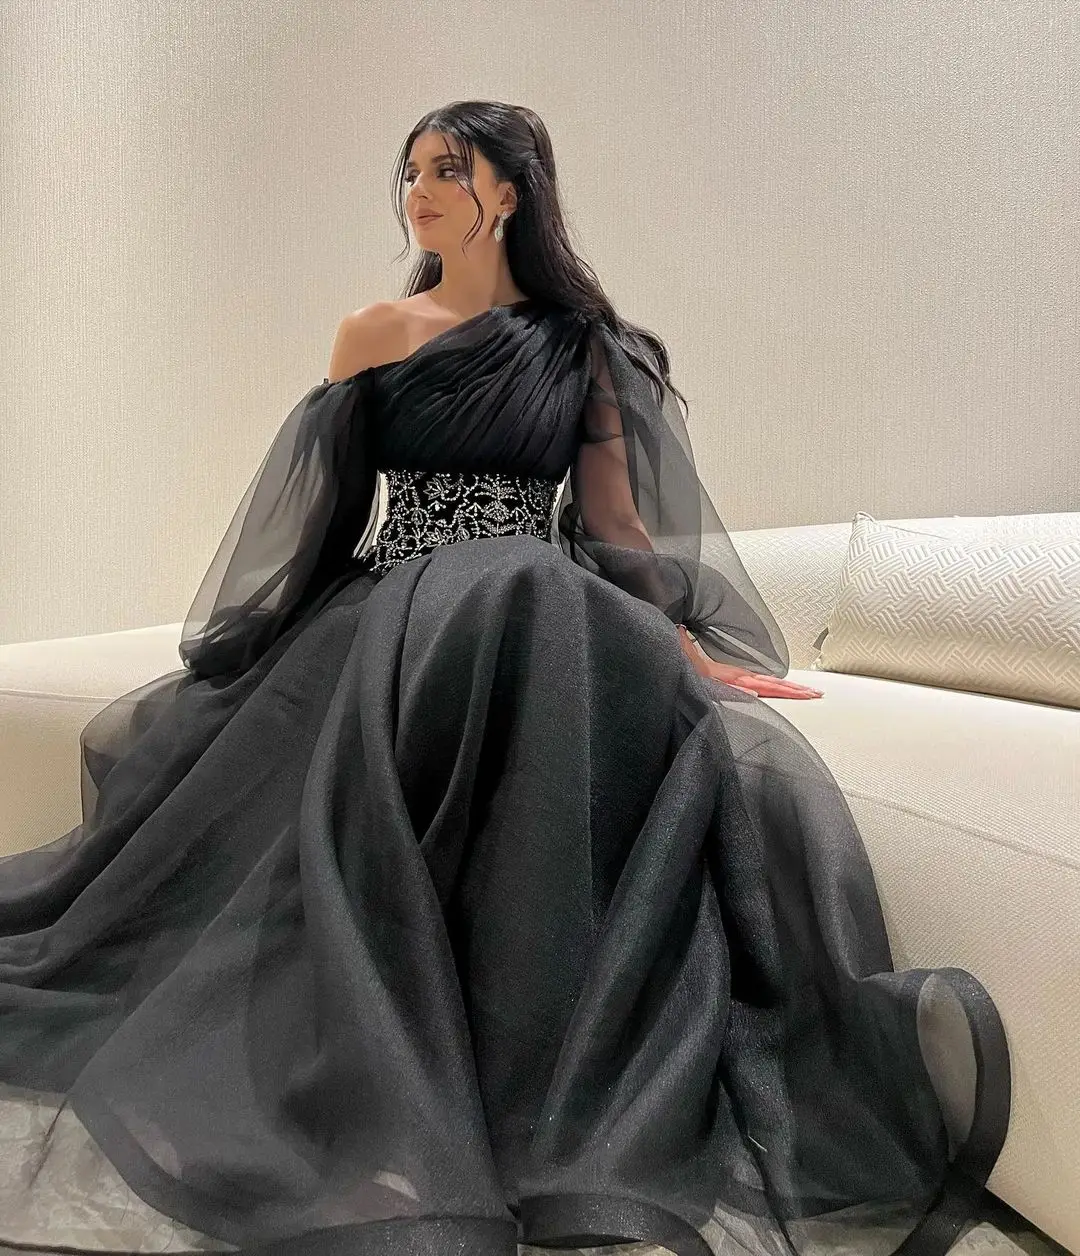 

Modest Tiered Ruffles Evening Dresses Blue Side Slit Boho Prom Dress Formal Party Gowns Bandage A Line Females Robe De Soiree